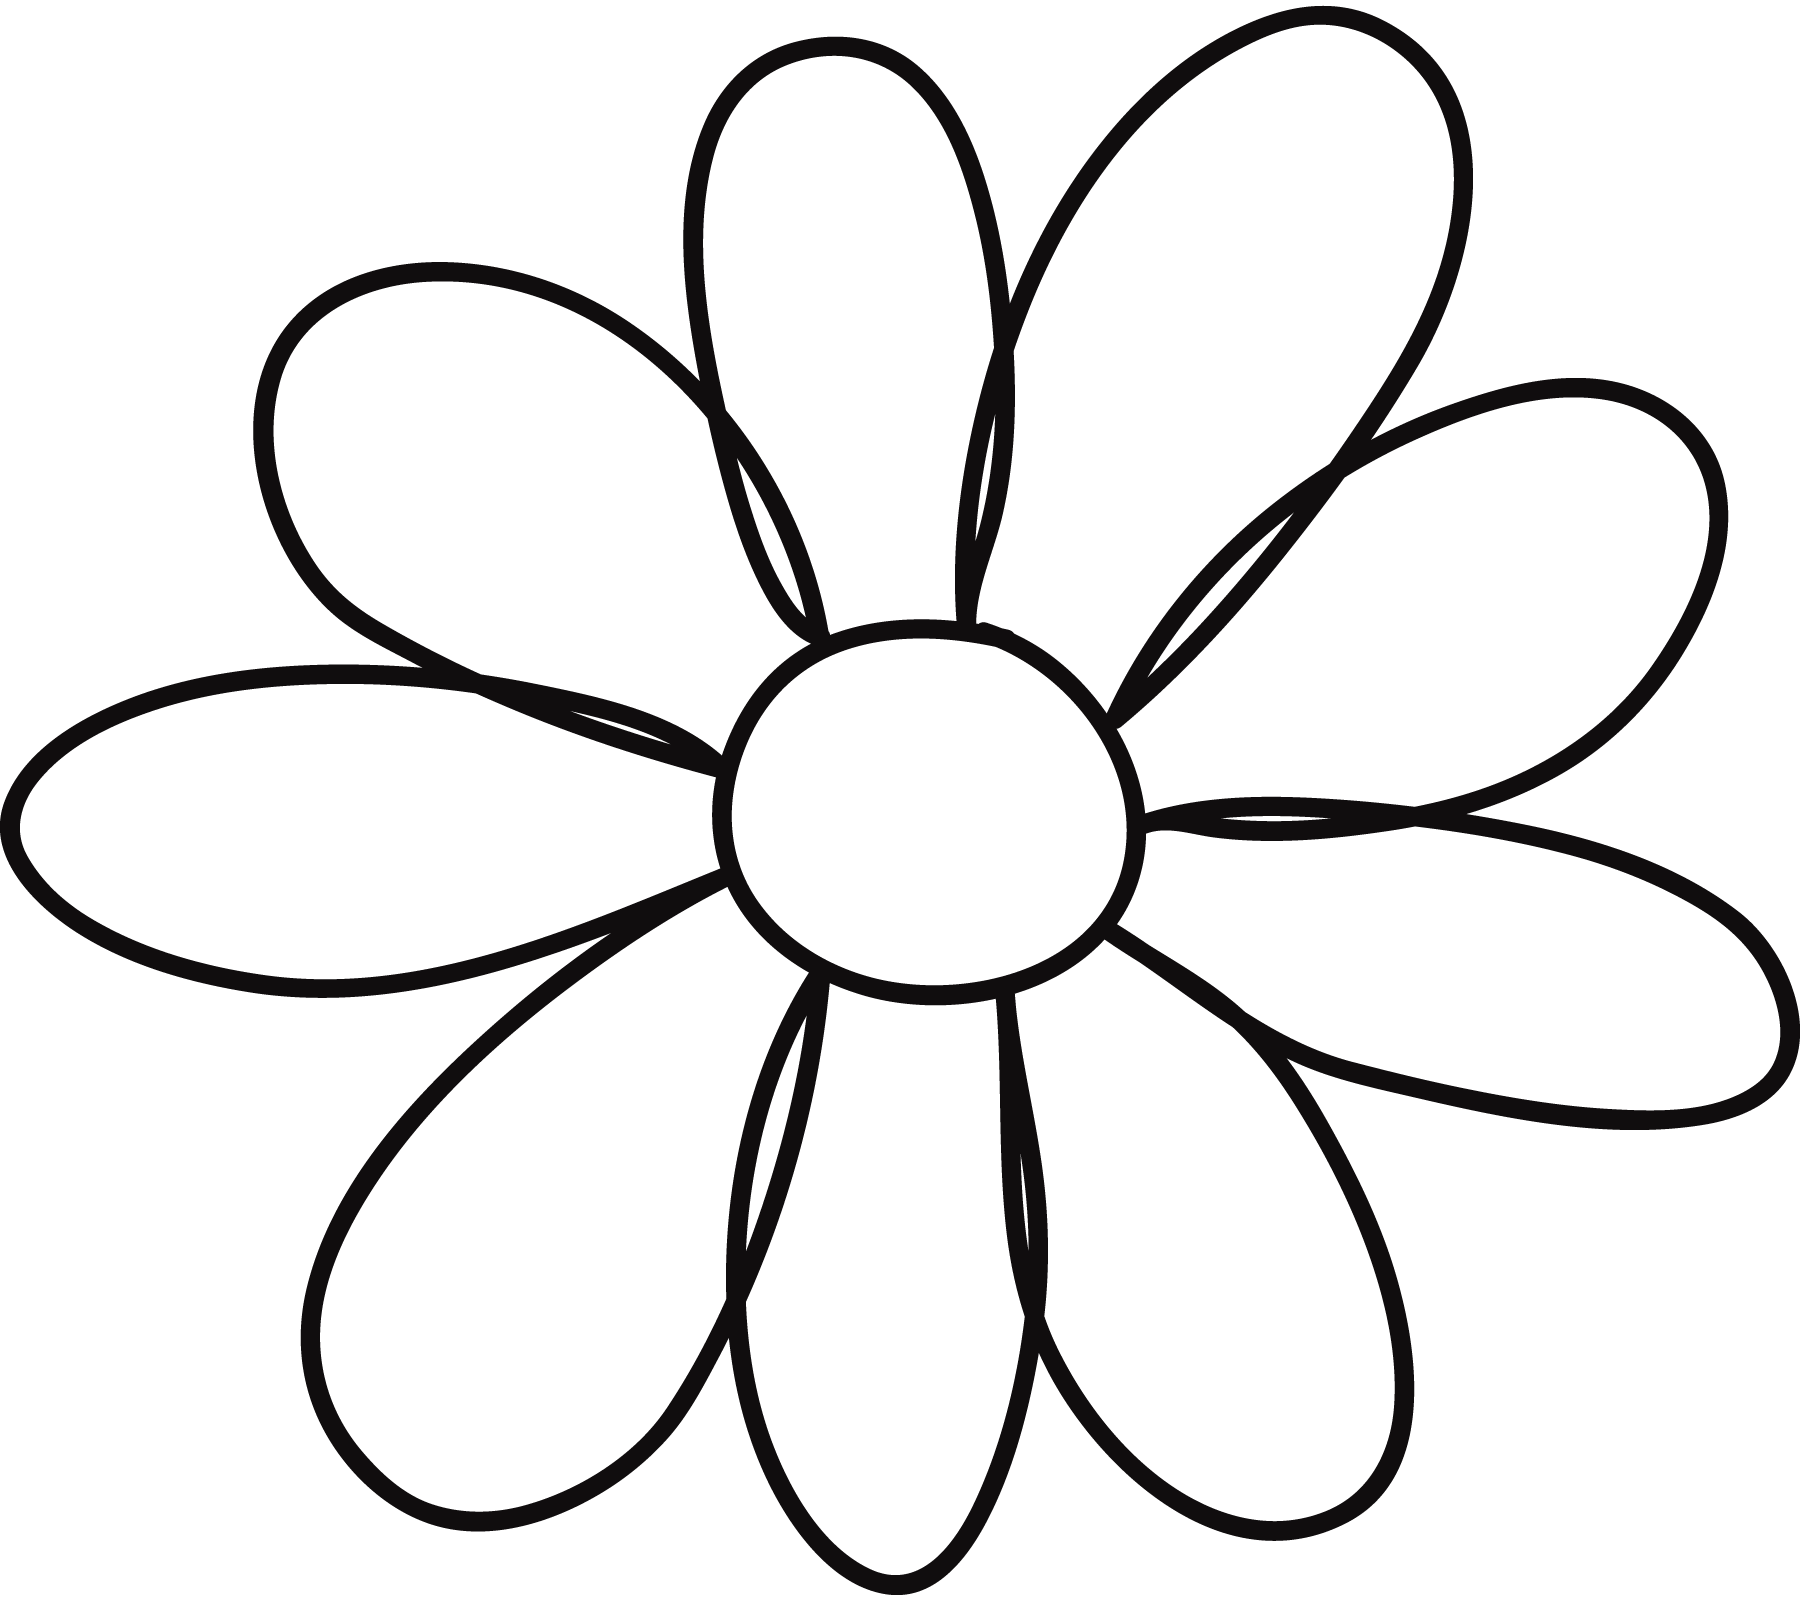 Patterns Of Flowers To Cut Out - ClipArt Best